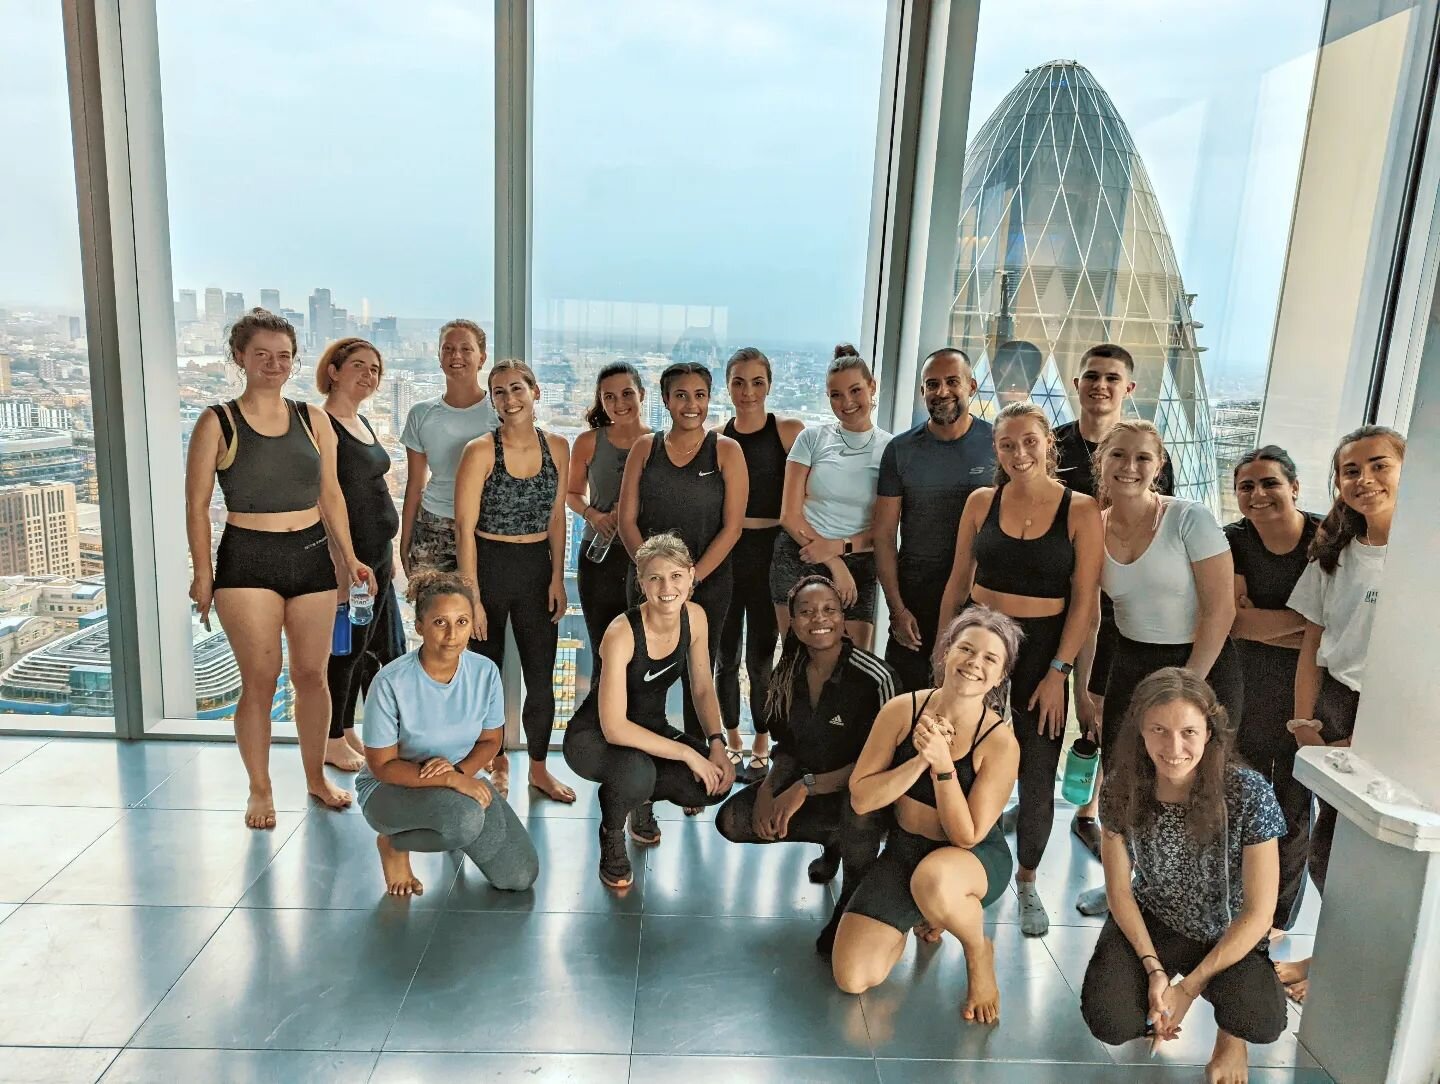 End of our Summer Series of weekly events for our amazing client @brookfieldpropertieslondon ❤️☀️ we finished with a bang with a packed class led by @corinnenaomi_, as we brought the sweat to Level 35 and finished with huge smiles on our faces!

All 